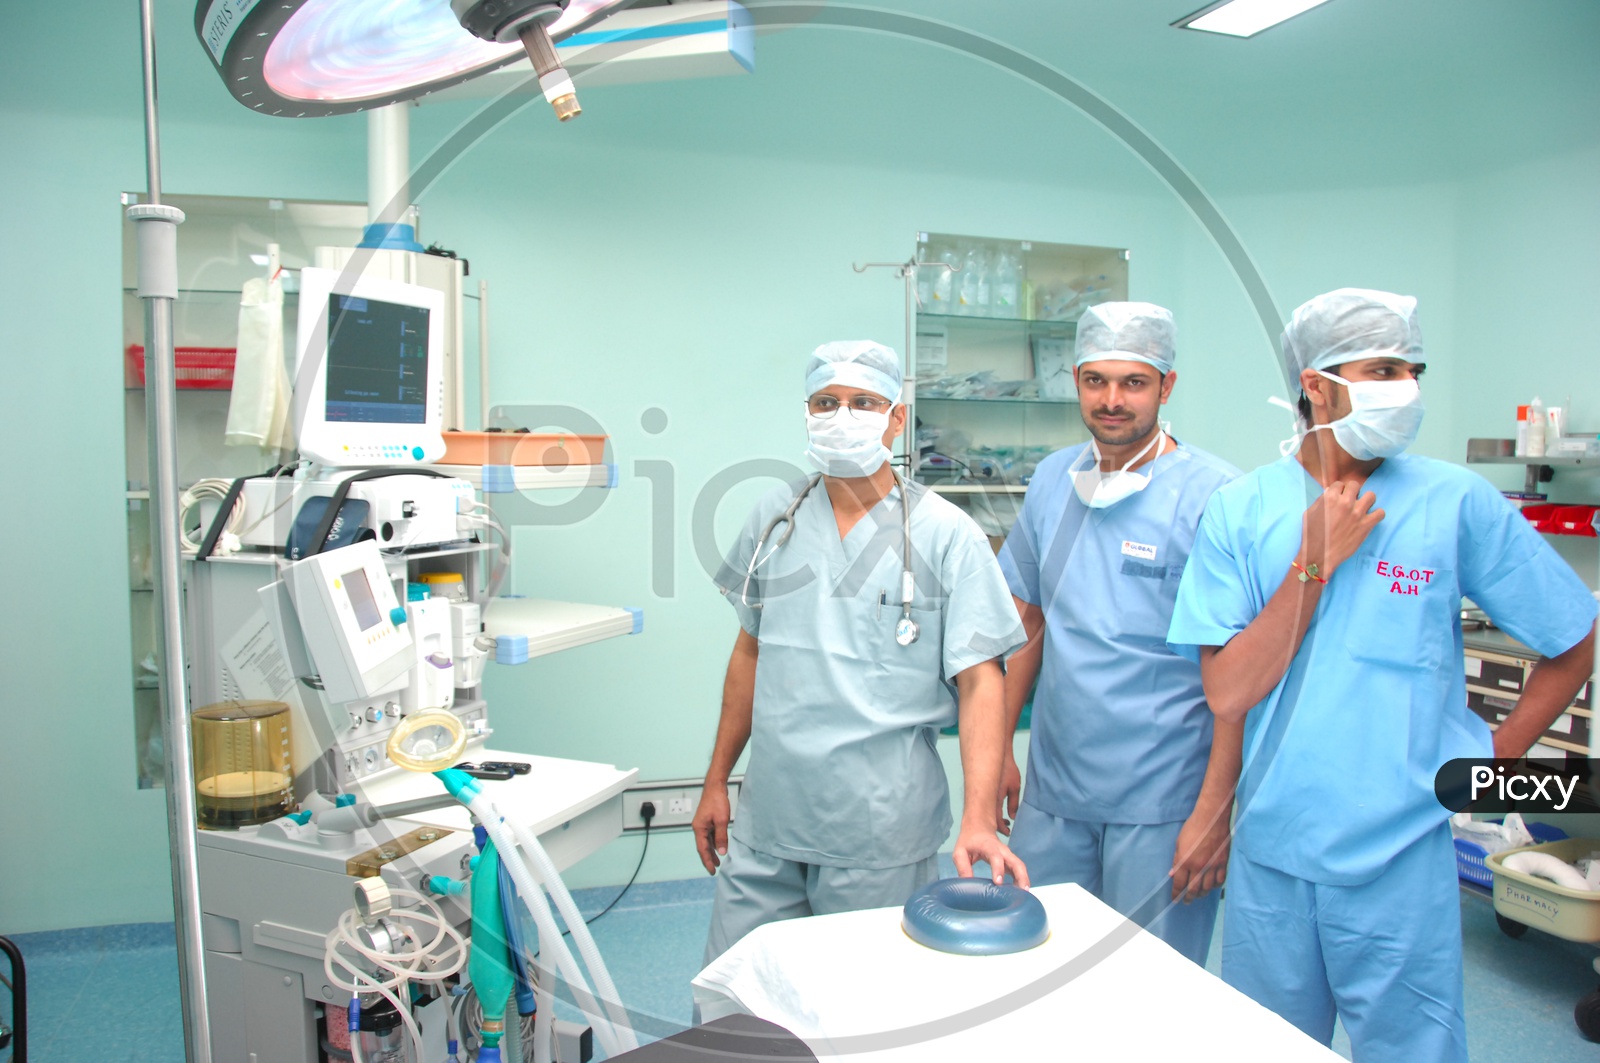 Doctors In Operation Theater